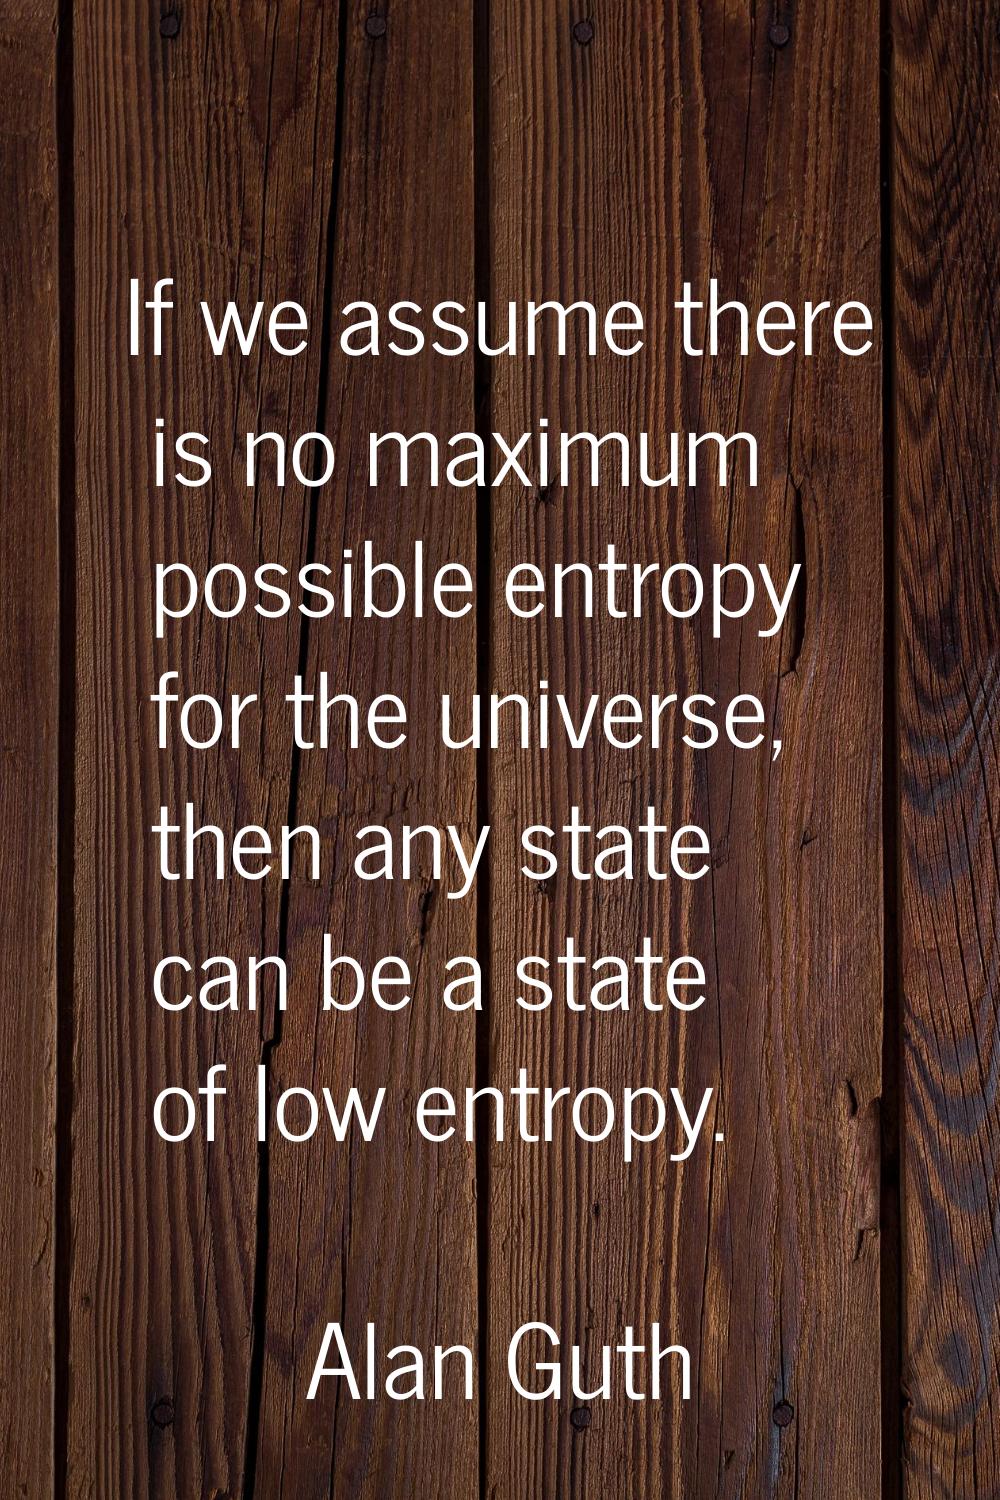 If we assume there is no maximum possible entropy for the universe, then any state can be a state o